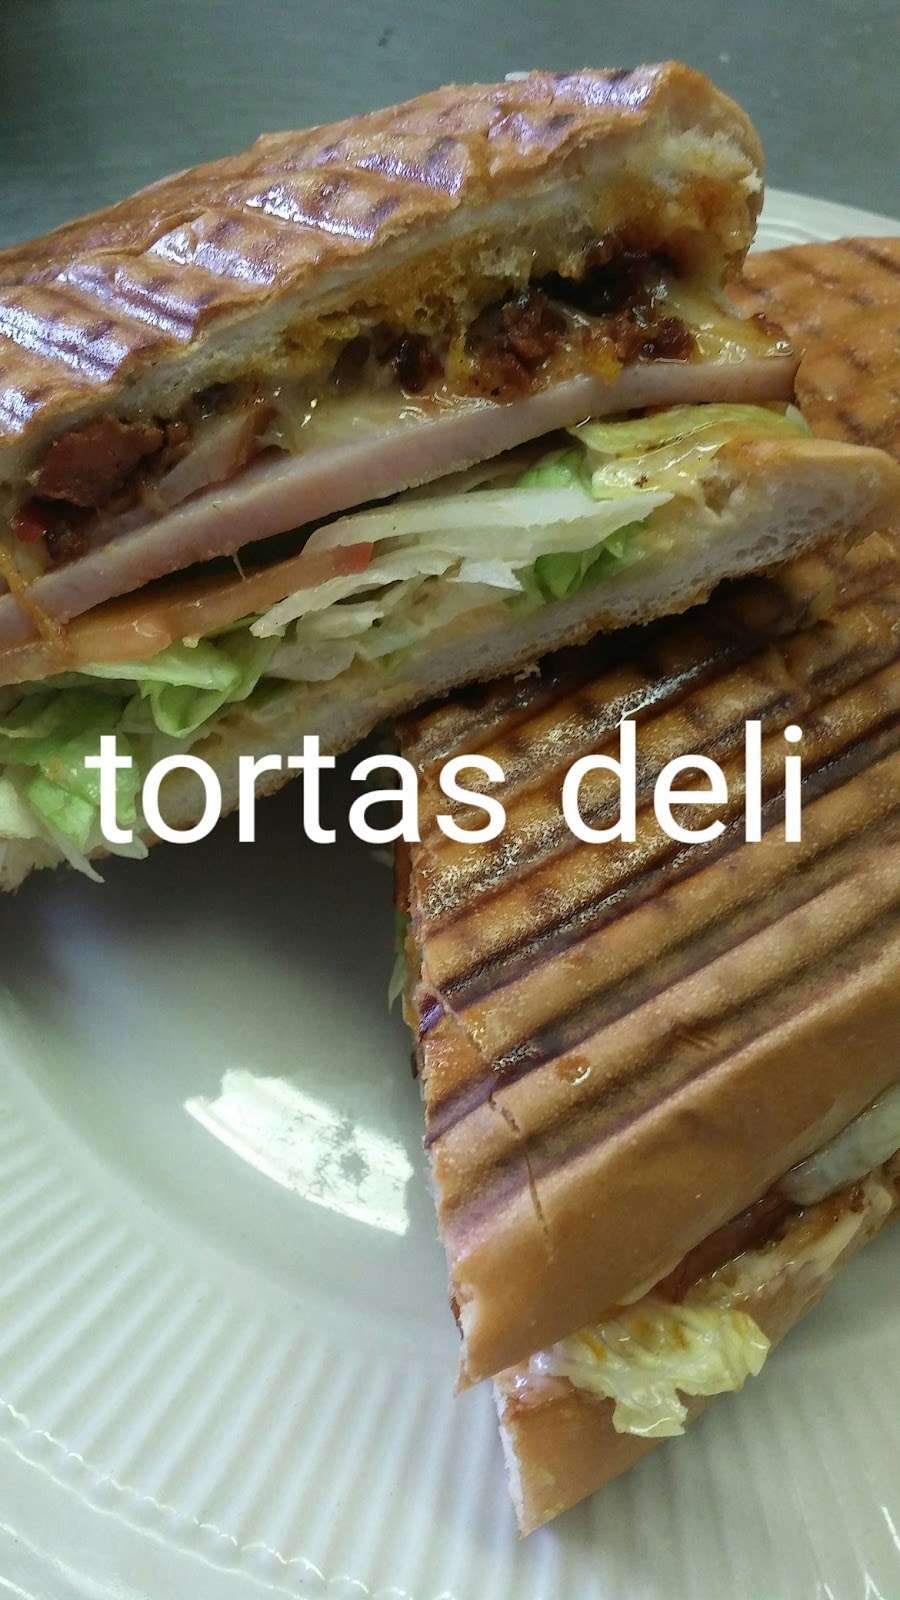 Tortas Deli and More | 30502 Misty Meadow Dr, Magnolia, TX 77354 | Phone: (281) 259-8414